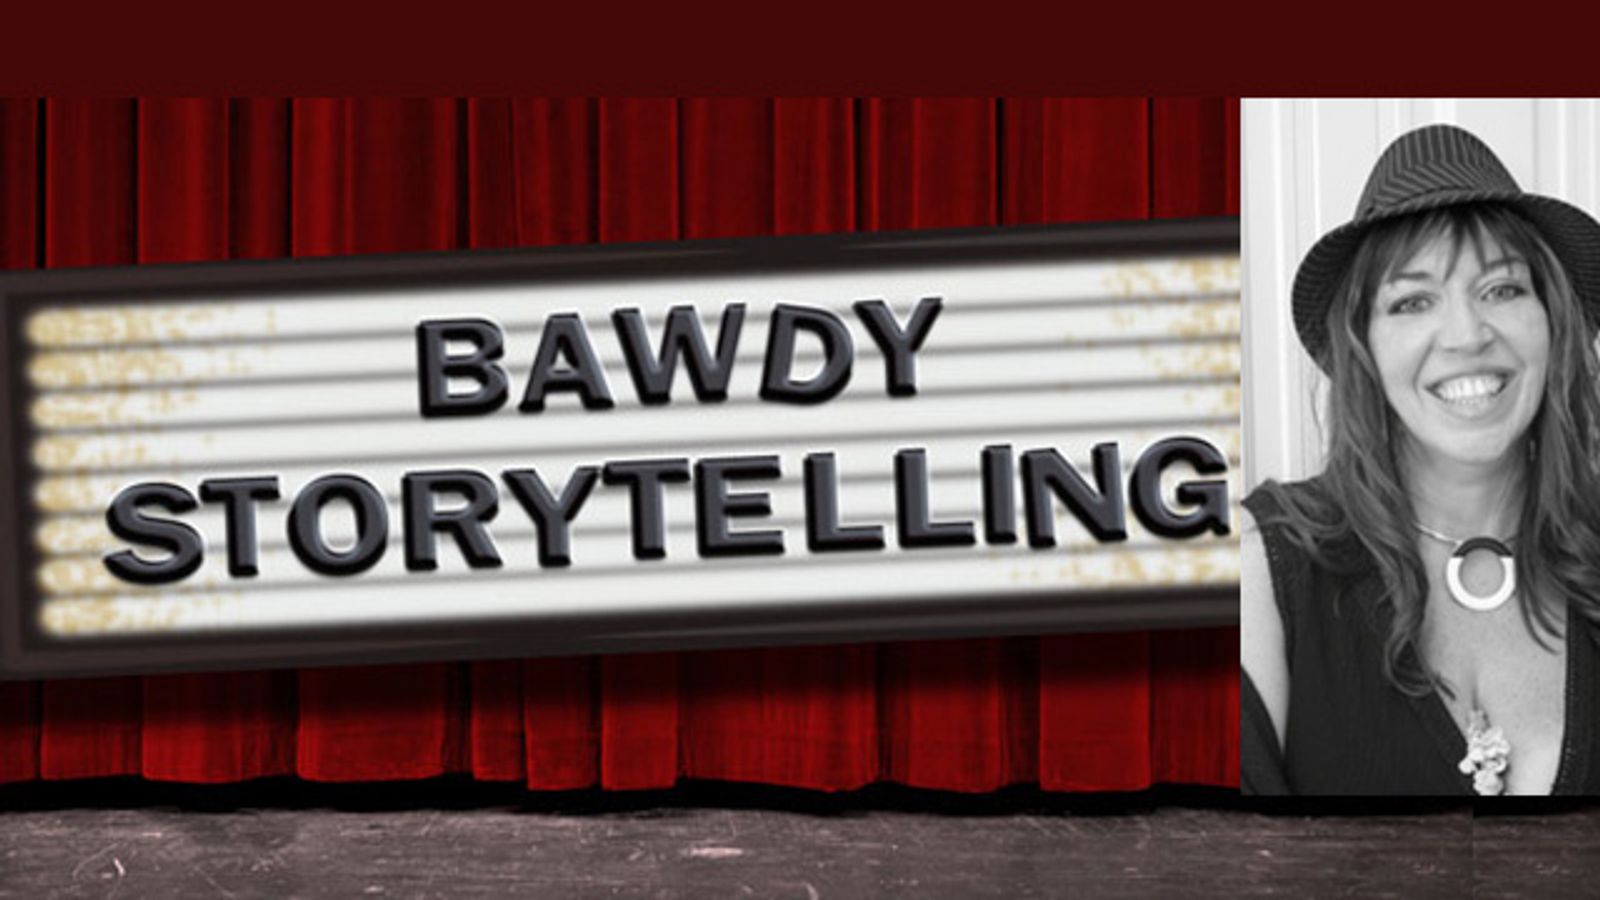 SF Perverts Bring Bawdy Storytelling to Los Angeles